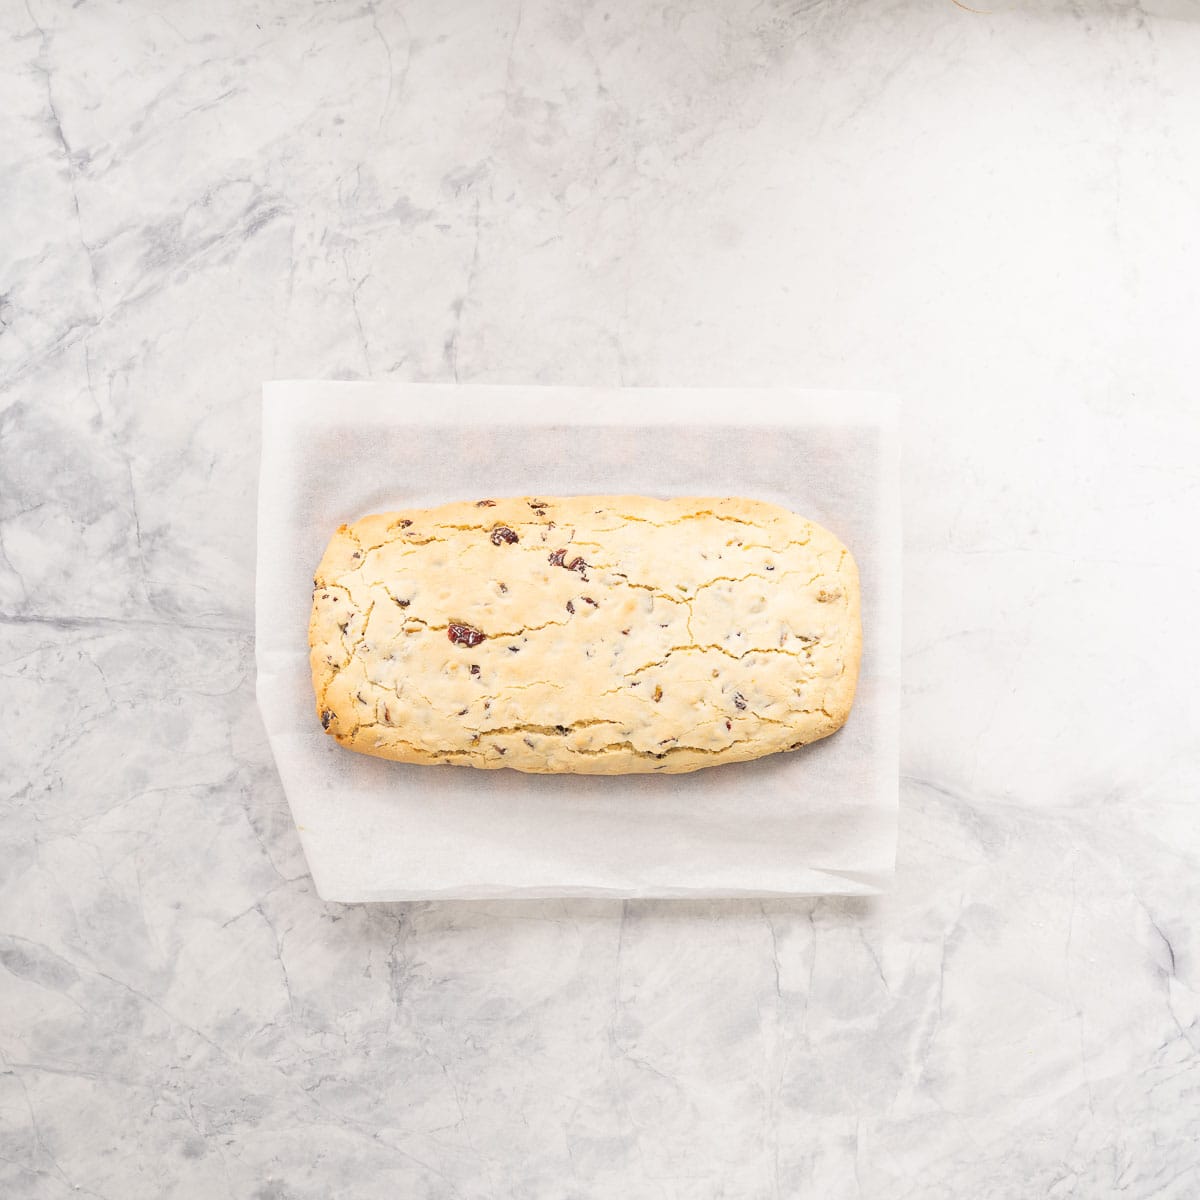 A large slab of baked biscotti dough.